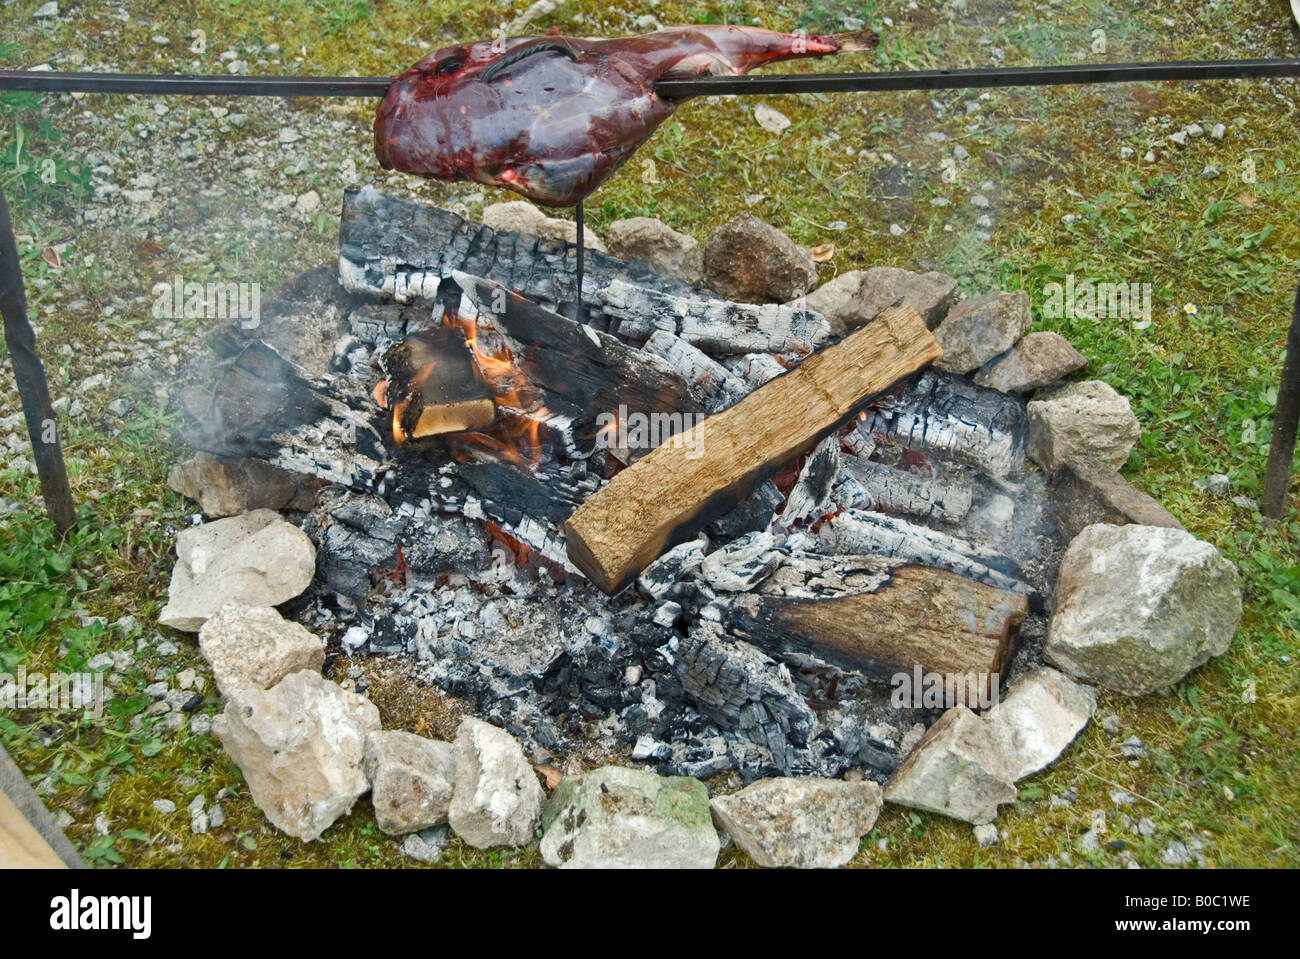 Stock photo of a piece of meat spit roasting over an open fire Stock Photo